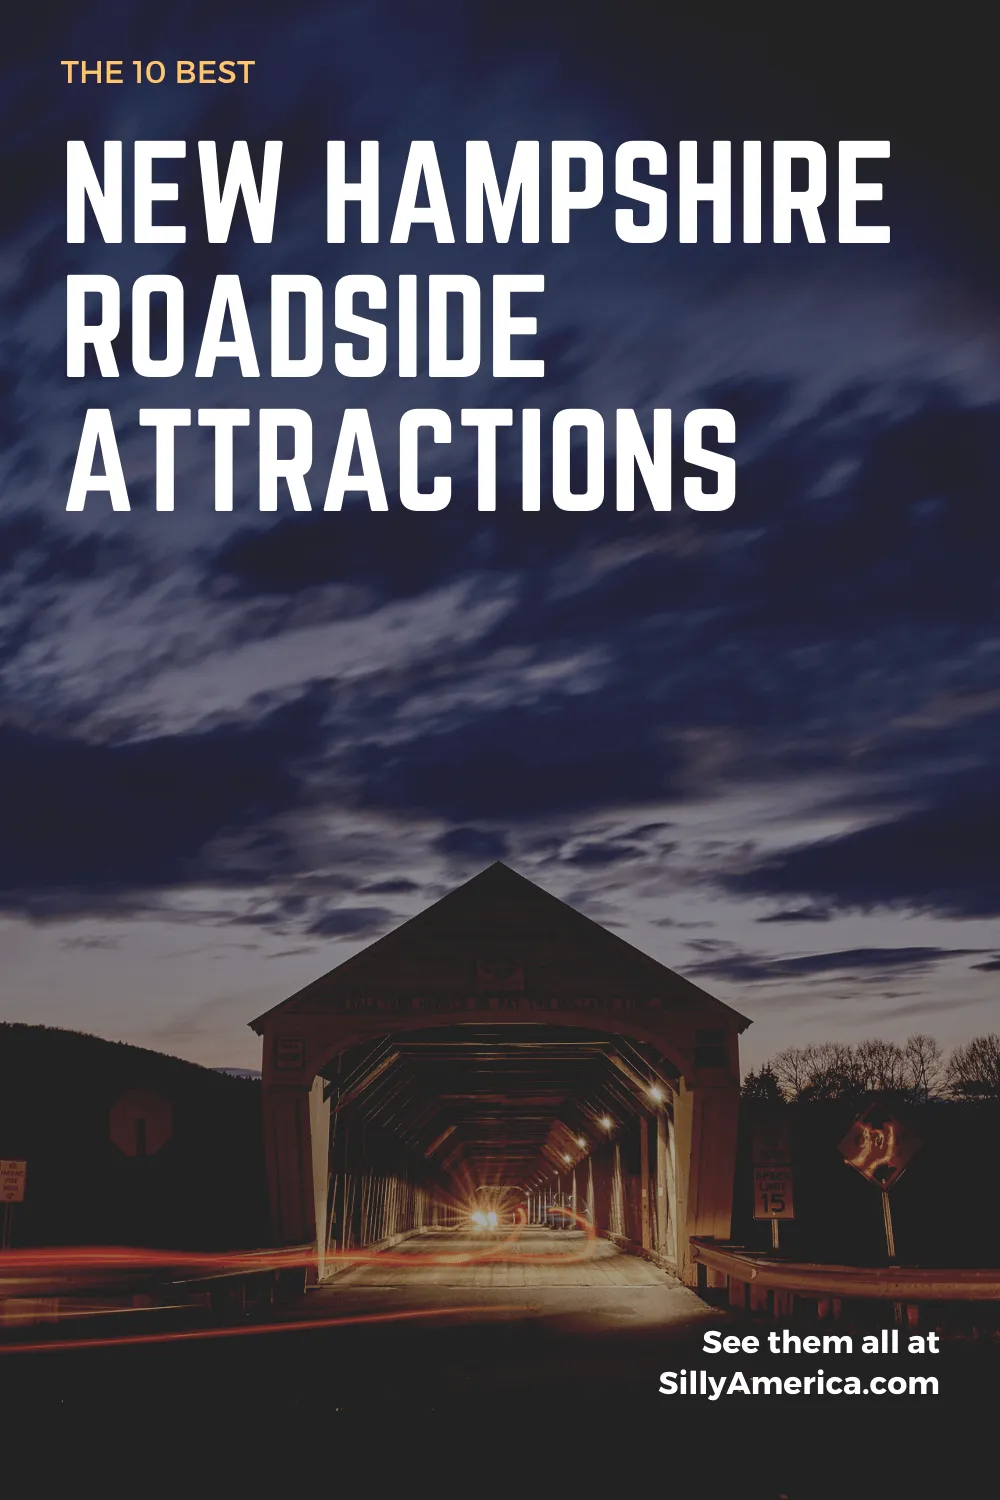 The best New Hampshire roadside attractions to visit on a New Hampshire road trip. Add these roadside oddities to your travel bucket list or itinerary! Whether you're visiting Concord, Manchester, or Portsmouth, visit these road trip stops for kids and adults. #NewHampshireRoadsideAttractions #NewHampshireRoadsideAttraction #RoadsideAttractions #RoadsideAttraction #RoadTrip #NewHampshireRoadTrip #NewHampshireRoadTripBucketList #NewHampshireFallRoadTrips #NewHampshireBucketList